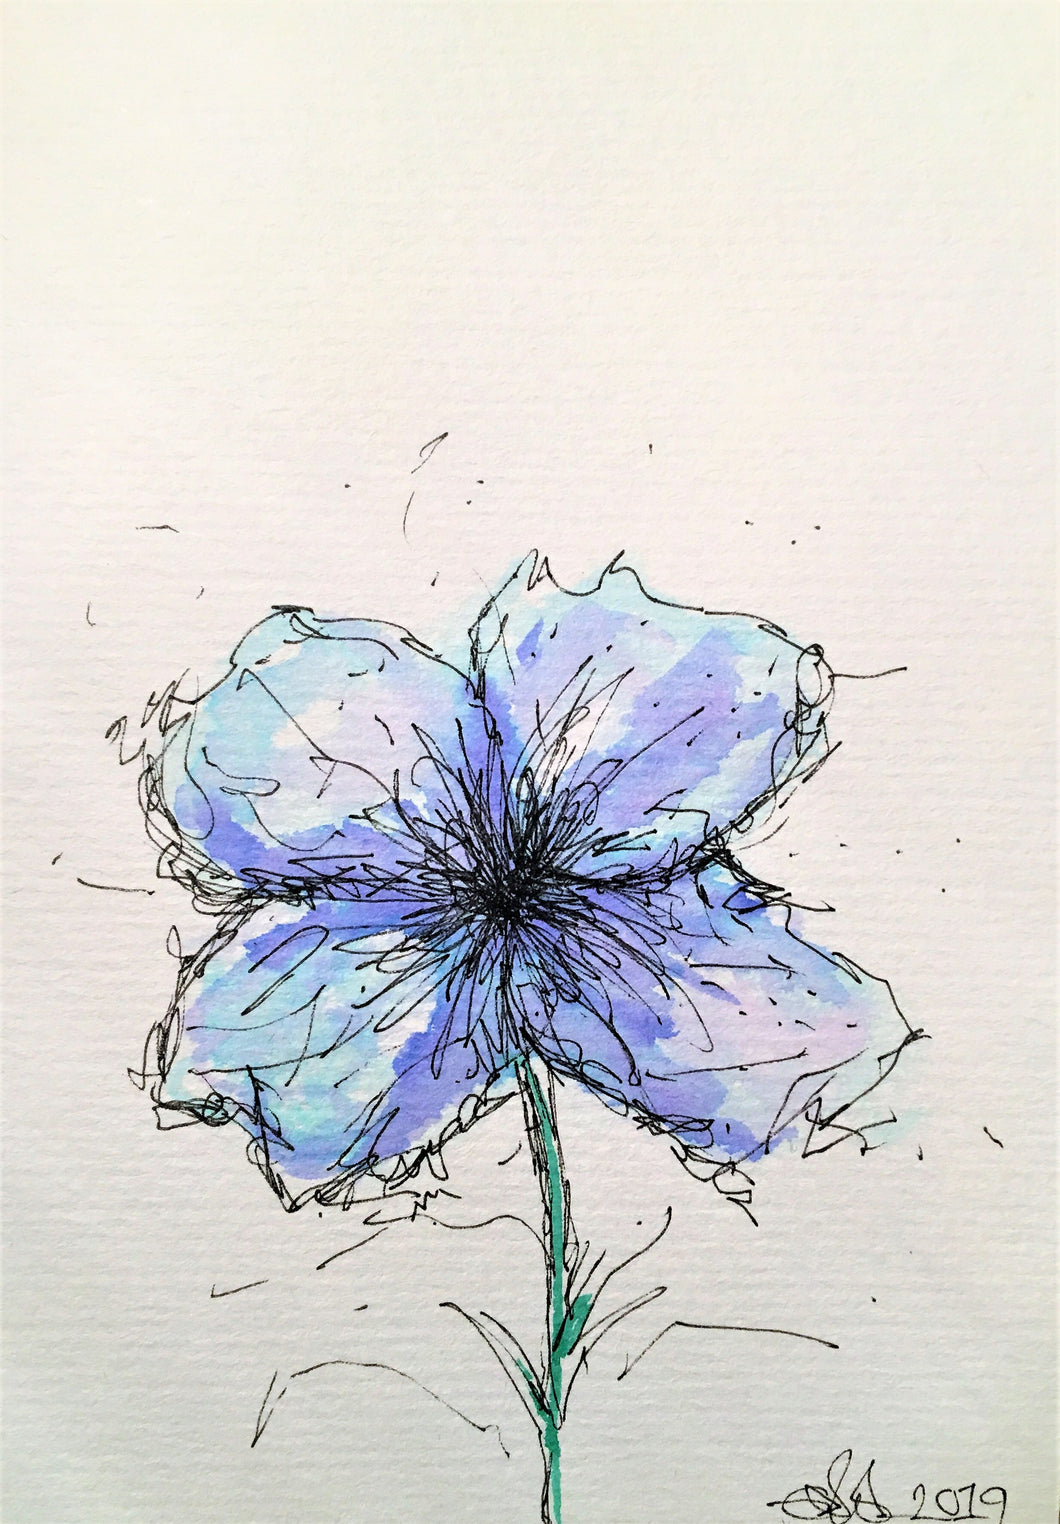 Handpainted Watercolour Greeting Card - Abstract Blue/Pale Blue Flower Design - eDgE dEsiGn London